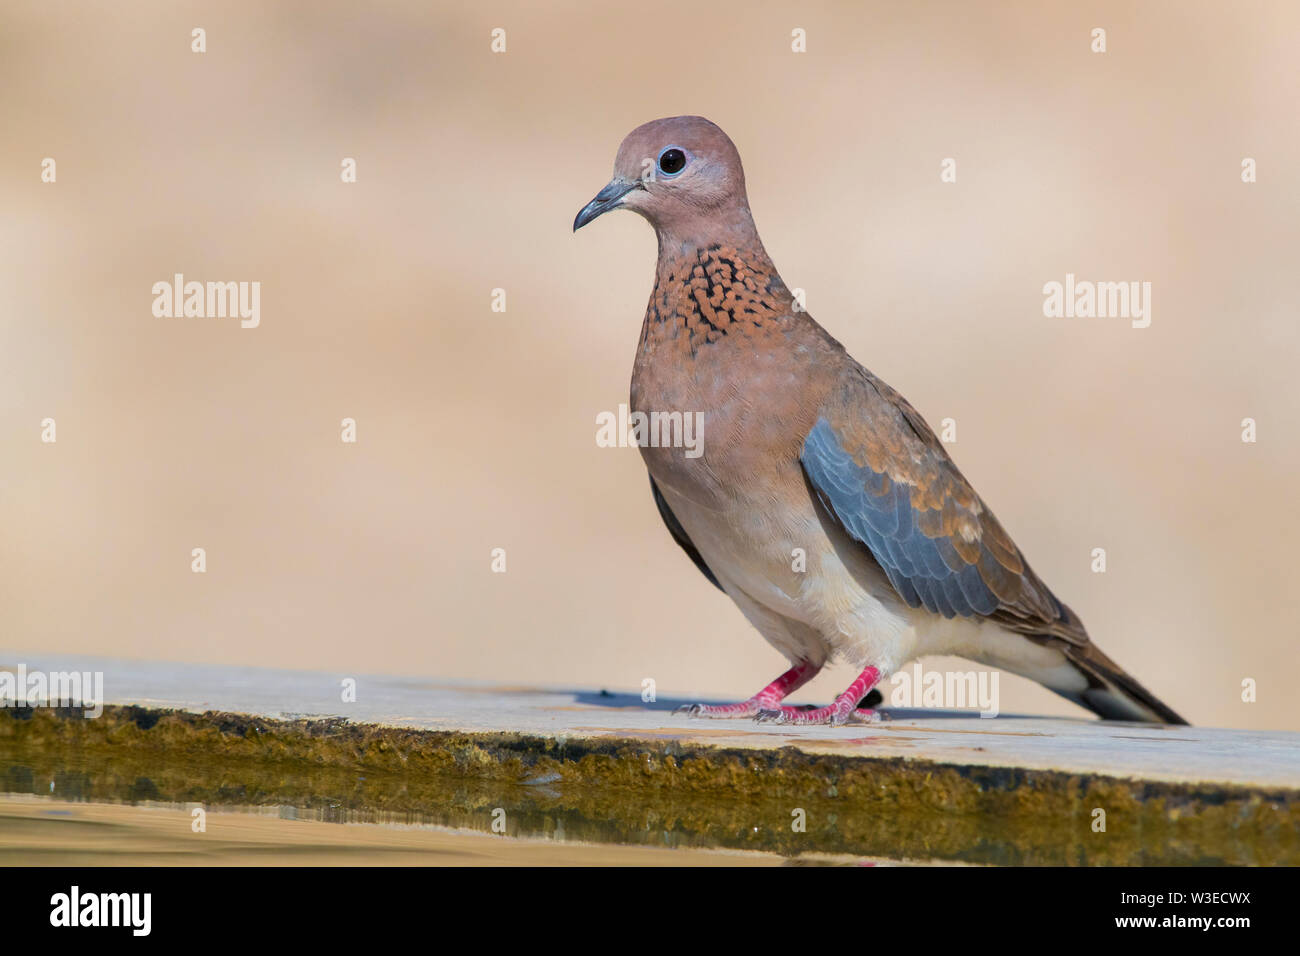 Laughing Dove (Streptopelia senegalensis cambayensis), adult standing on the edge of a drinking pool, Dhofar, Oman Stock Photo